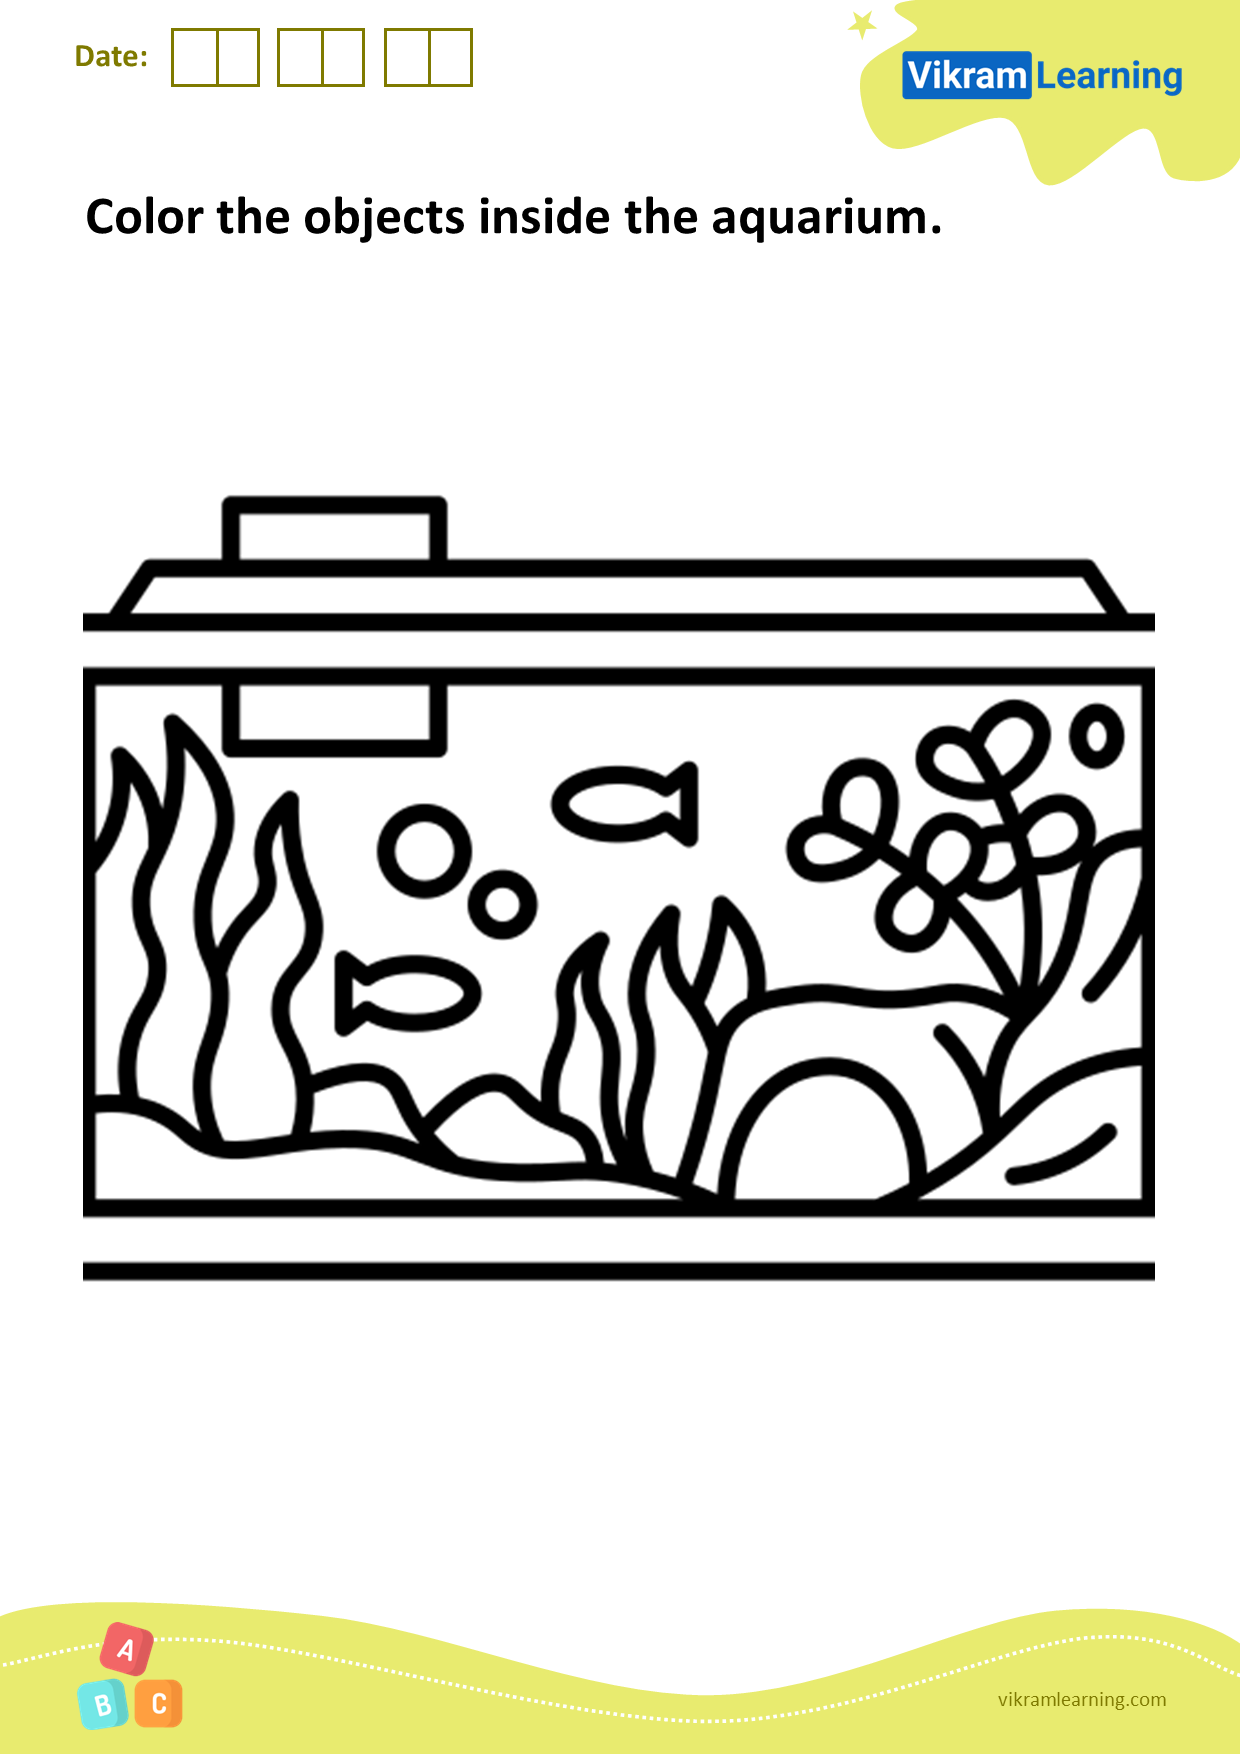 download-color-the-objects-inside-the-aquarium-worksheets